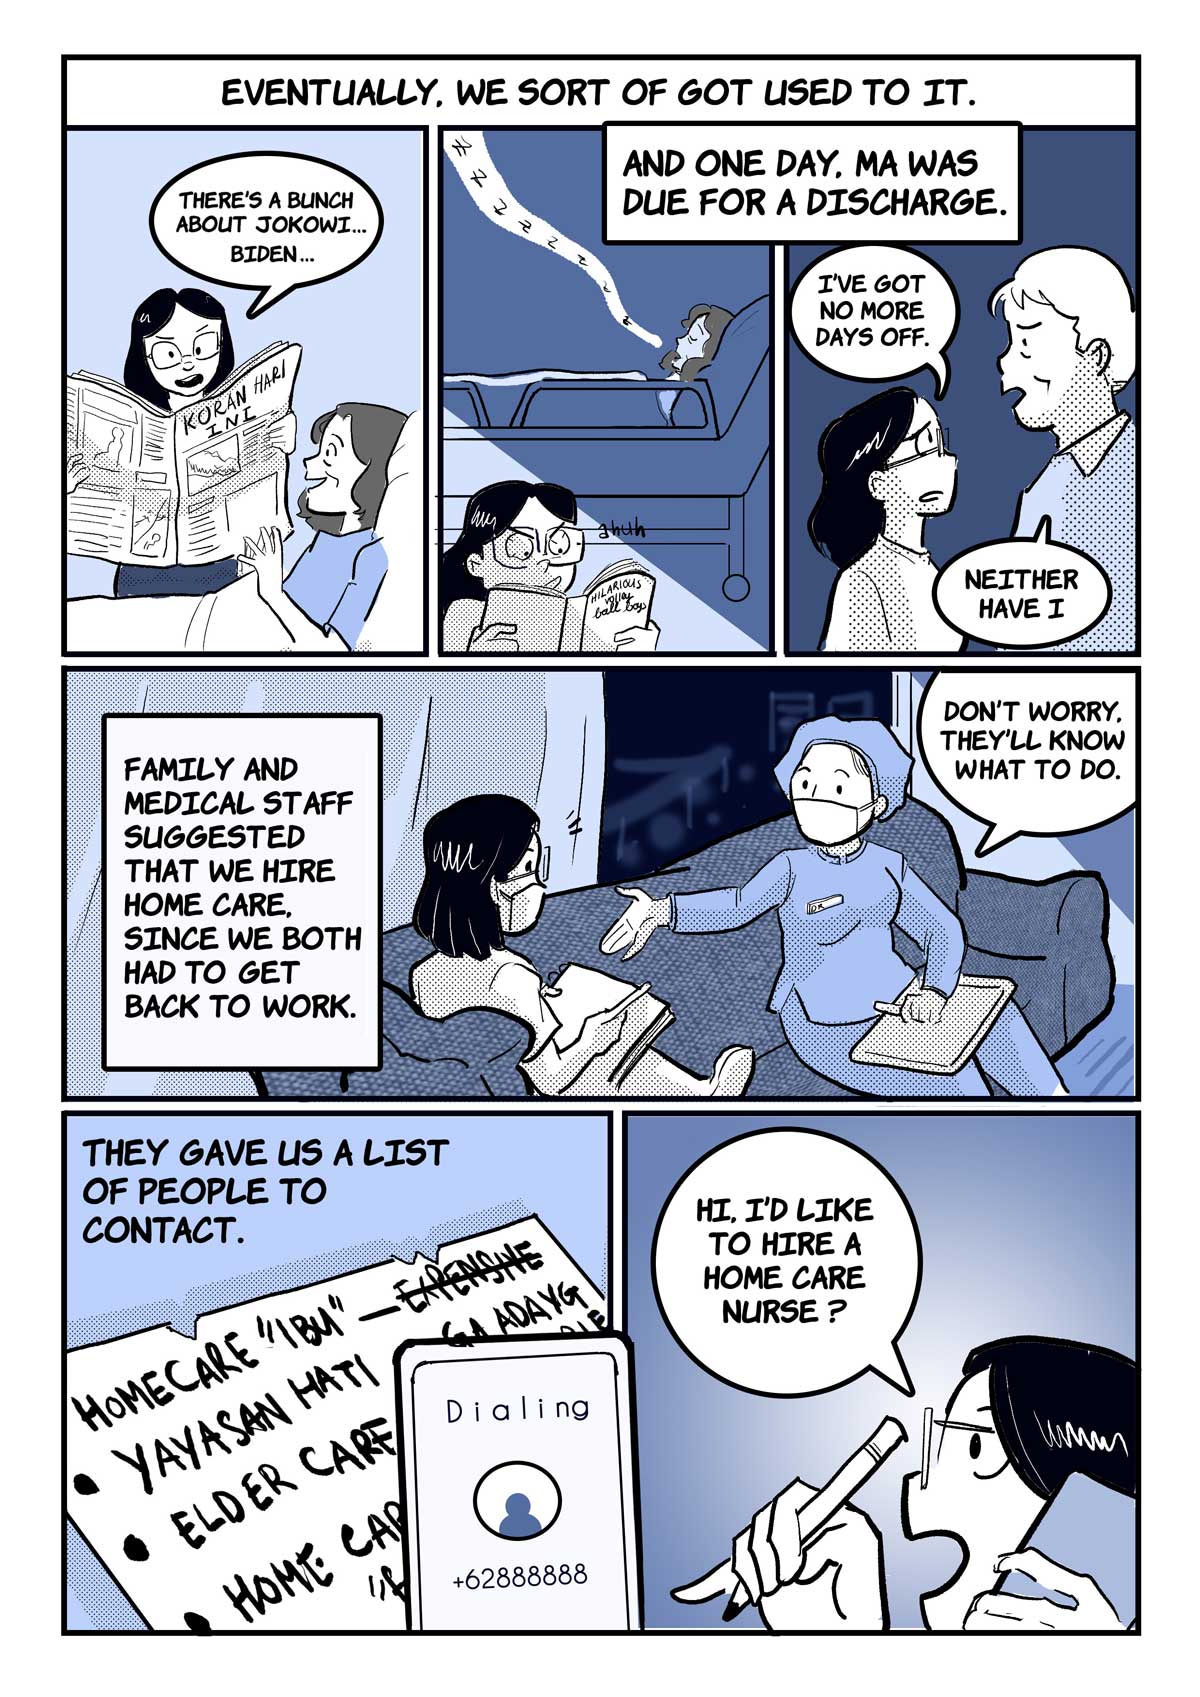 A comic page of 6 panels in black and various shades of blue and grey. The narration is provided in caption boxes.
Panel 1 to 3. Narrator: "Eventually, we sort of got used to it." Stephani reads the Koran Hari Ini newspaper to her mother, who is on a hospital bed. "There’s a bunch about Jokowi...Biden...", she points out. In the next panel, the lights are off and it is night; Stephani reads by lamplight while her mum sleeps. Narrator: "And one day, Ma was due for a discharge." Stephani and her dad look at each other worriedly. "I've got no more days off," she says, and he replies, "Neither have I."
Panel 4. Narrator: "Family and medical staff suggested that we hire home care, since we both had to get back to work." A nurse and Stephani sit on a couch, conversing; the nurse says reassuringly: "Don’t worry, they’ll know what to do."
Panel 5. Narrator: "They gave us a list of people to contact." A handwritten list of homes with notes; expensive is crossed out. A mobile phone screen is shown dialing a number.
Panel 6. Stephani, holding her phone to her ear and a pencil in her other hand, says enthusiastically: "Hi, I’d like to hire a home care nurse?"